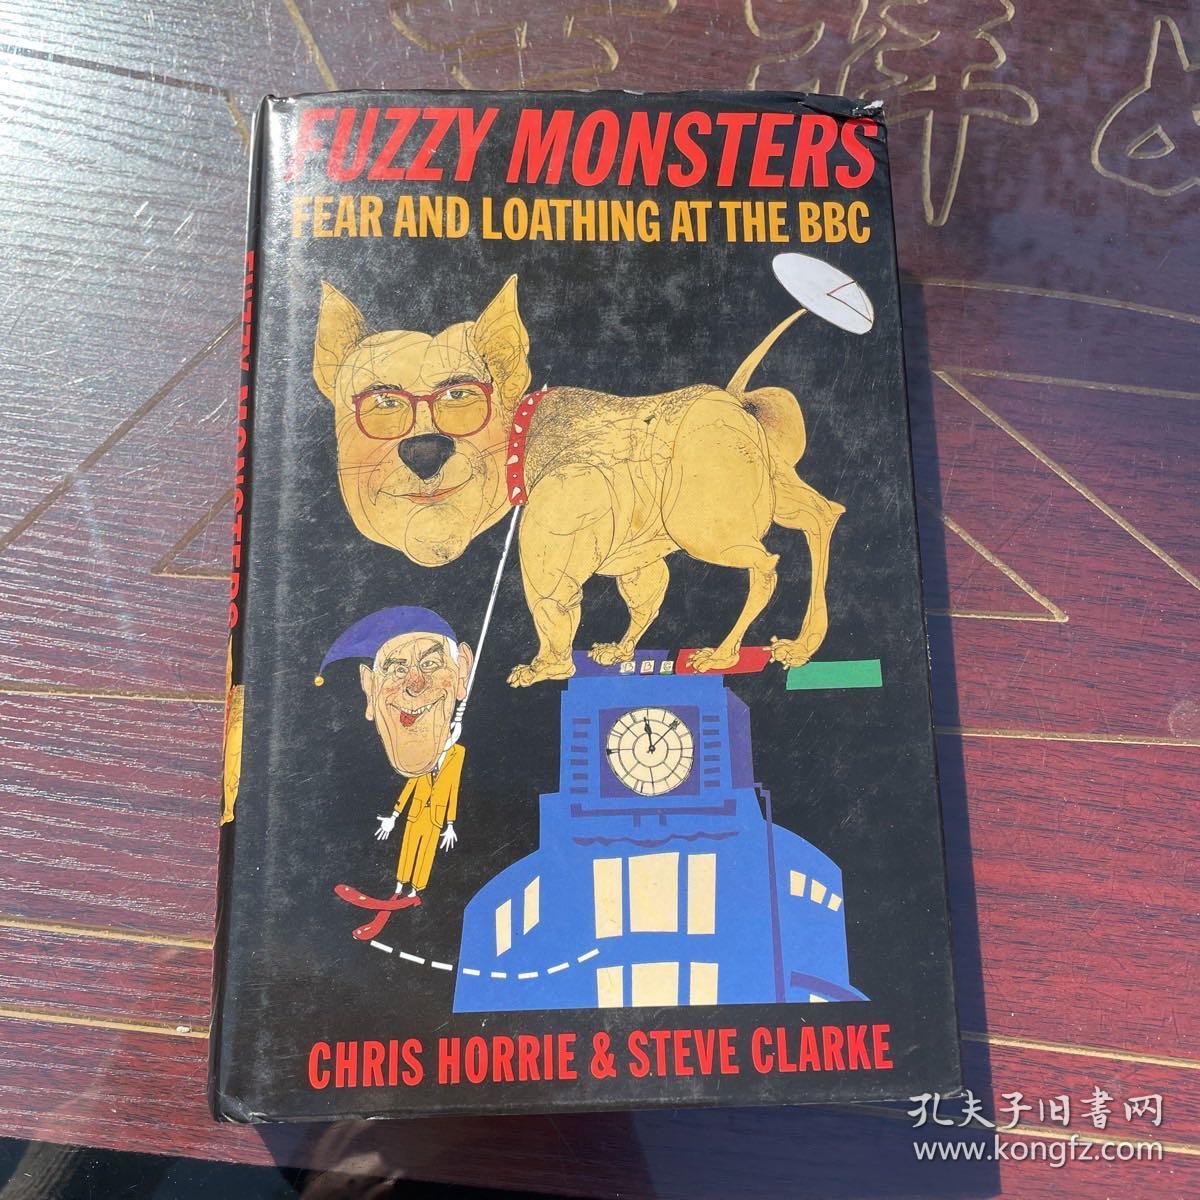 FUZZY MONSTERS （FEAR AND LOATHING AT THE BBC）